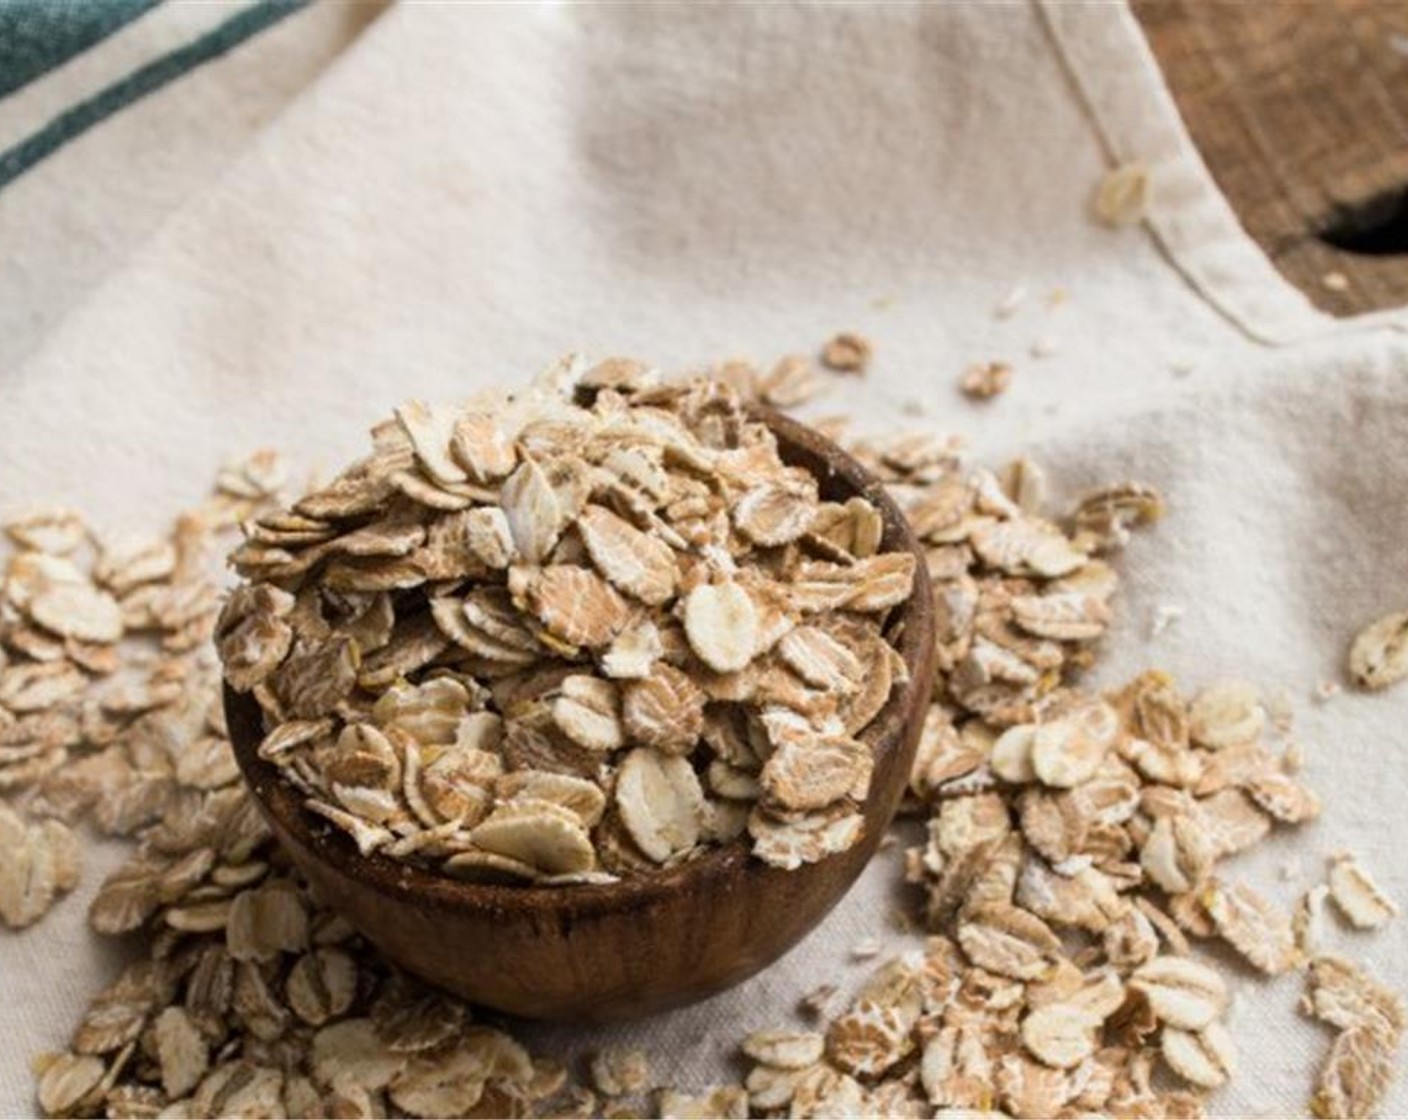 step 6 While squash and barley cook, add Oats (1/2 cup) and Bran Flakes (1 cup) to food processor or NutriBullet and blend until they reach a flour-like consistency.